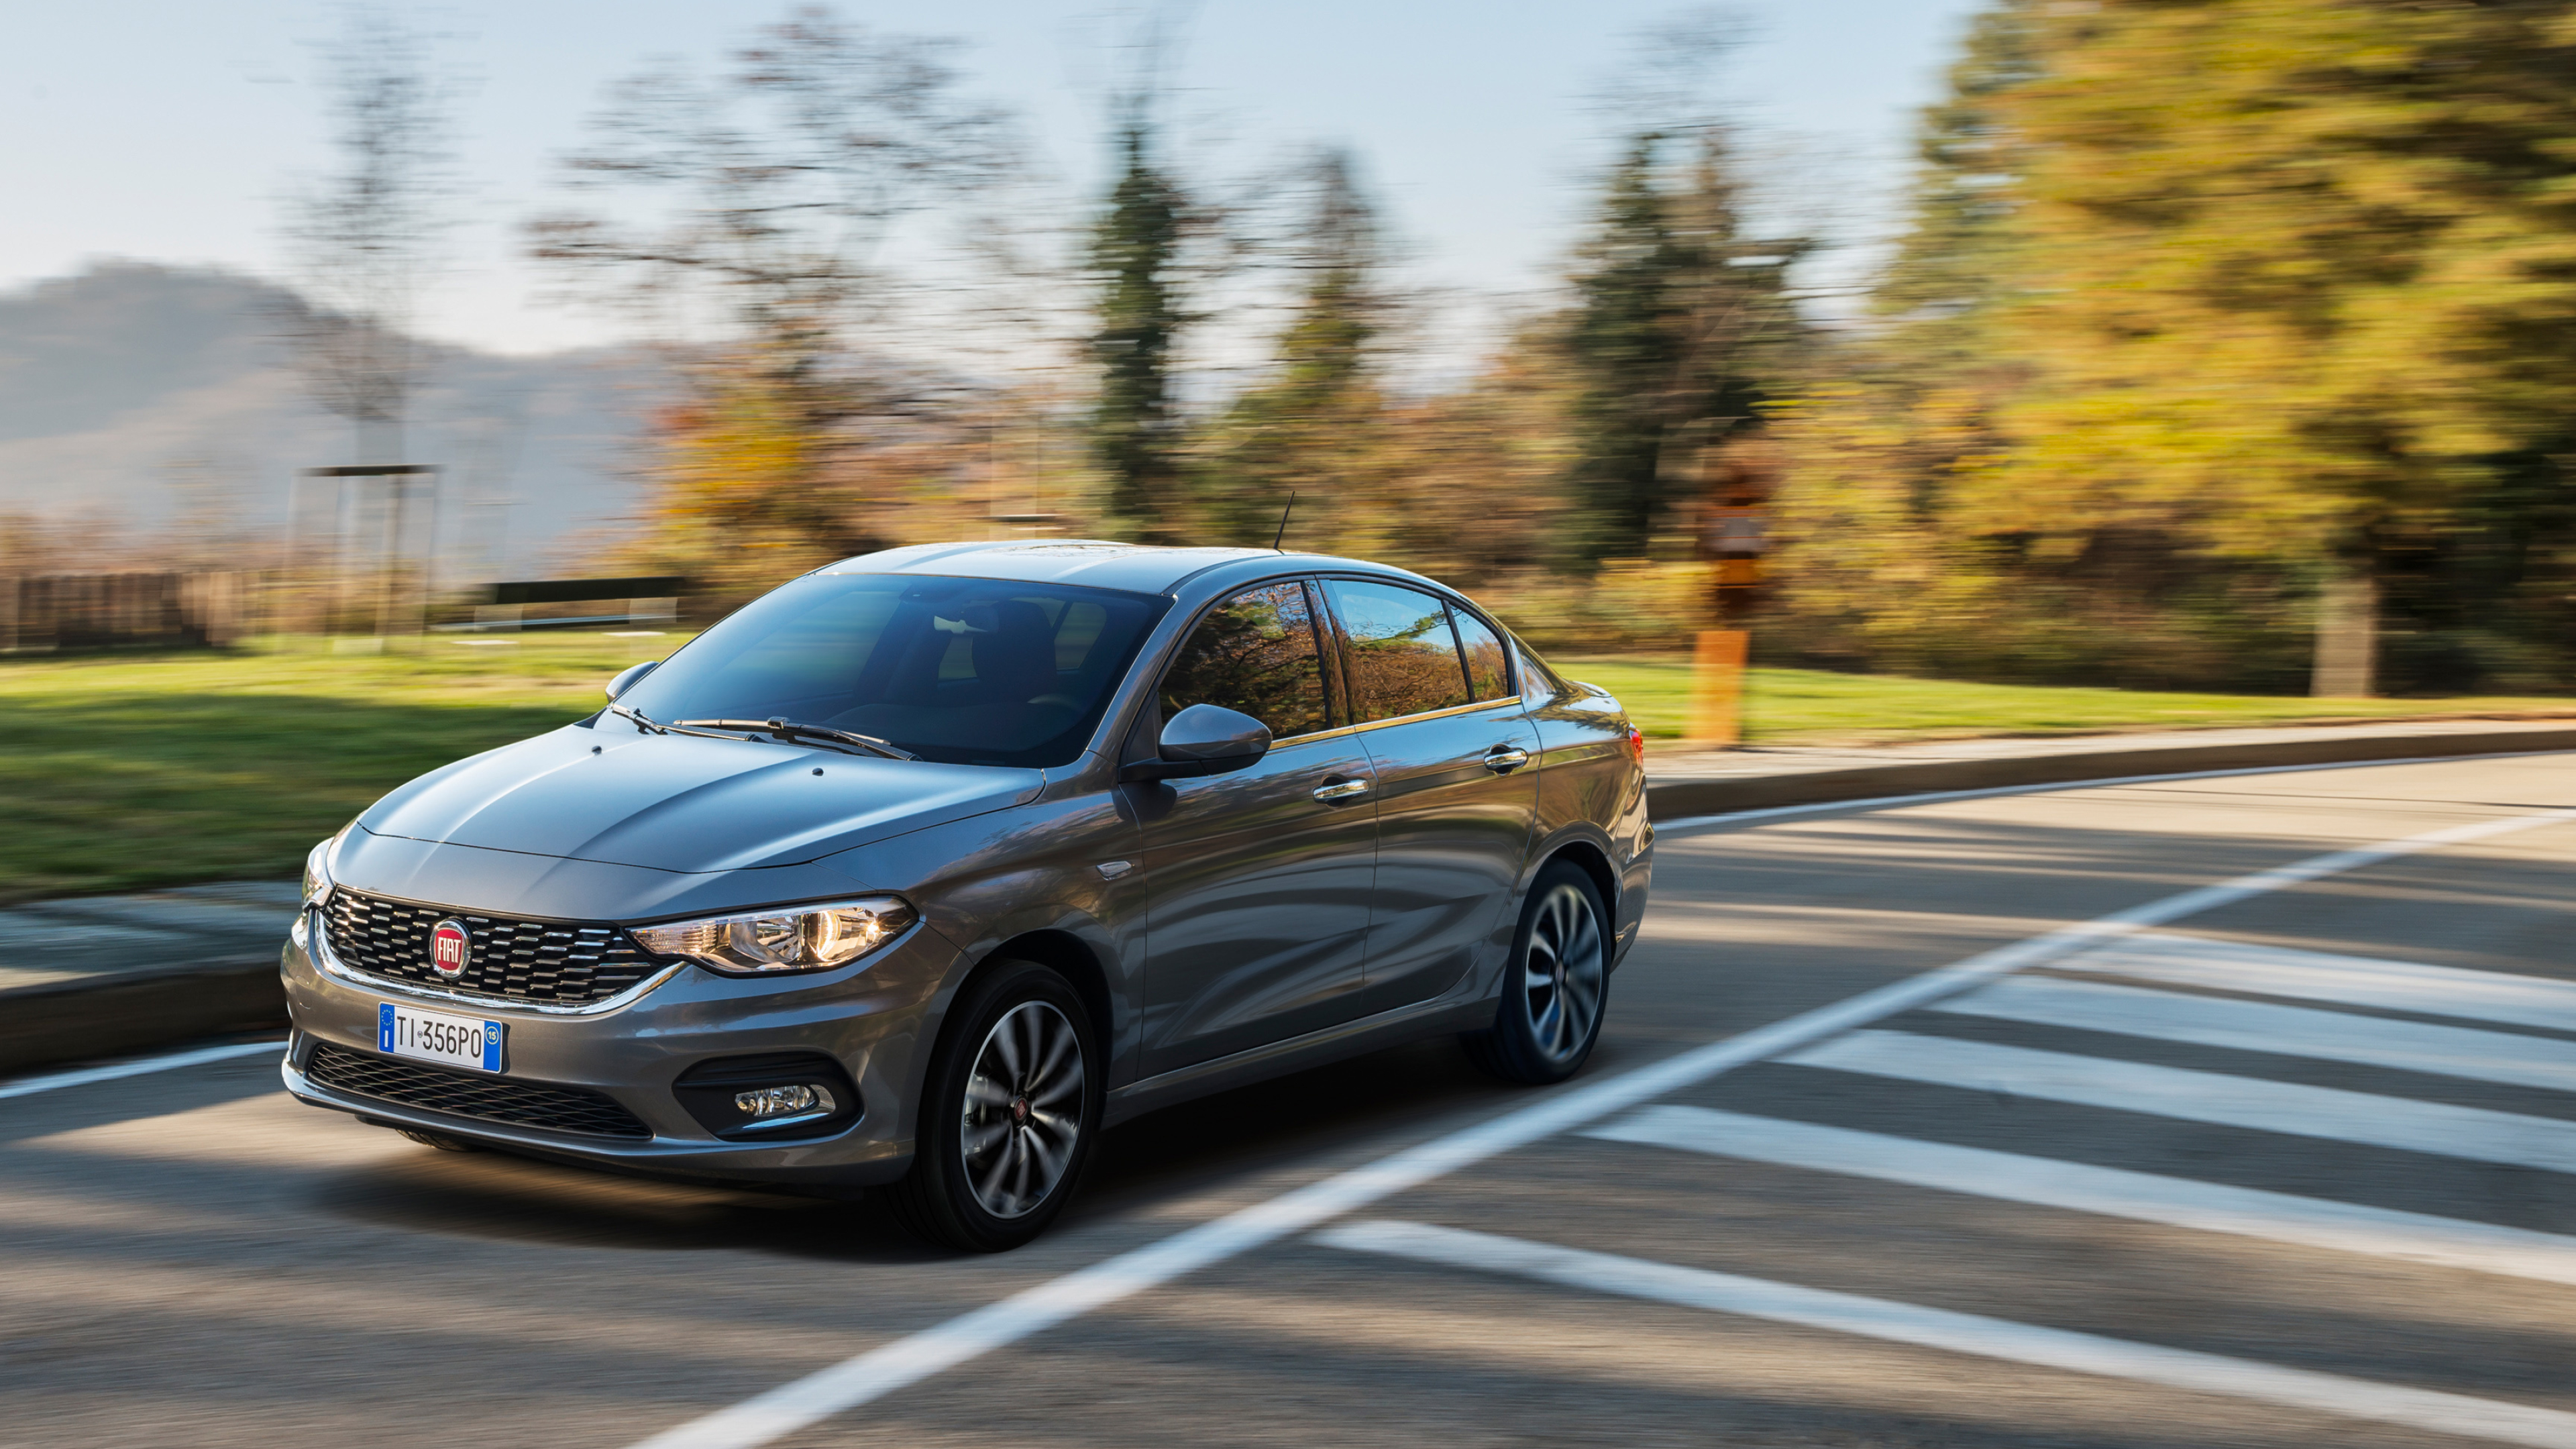 Fiat Tipo, Affordable and practical, Compact family car, Italian charm, 3840x2160 4K Desktop